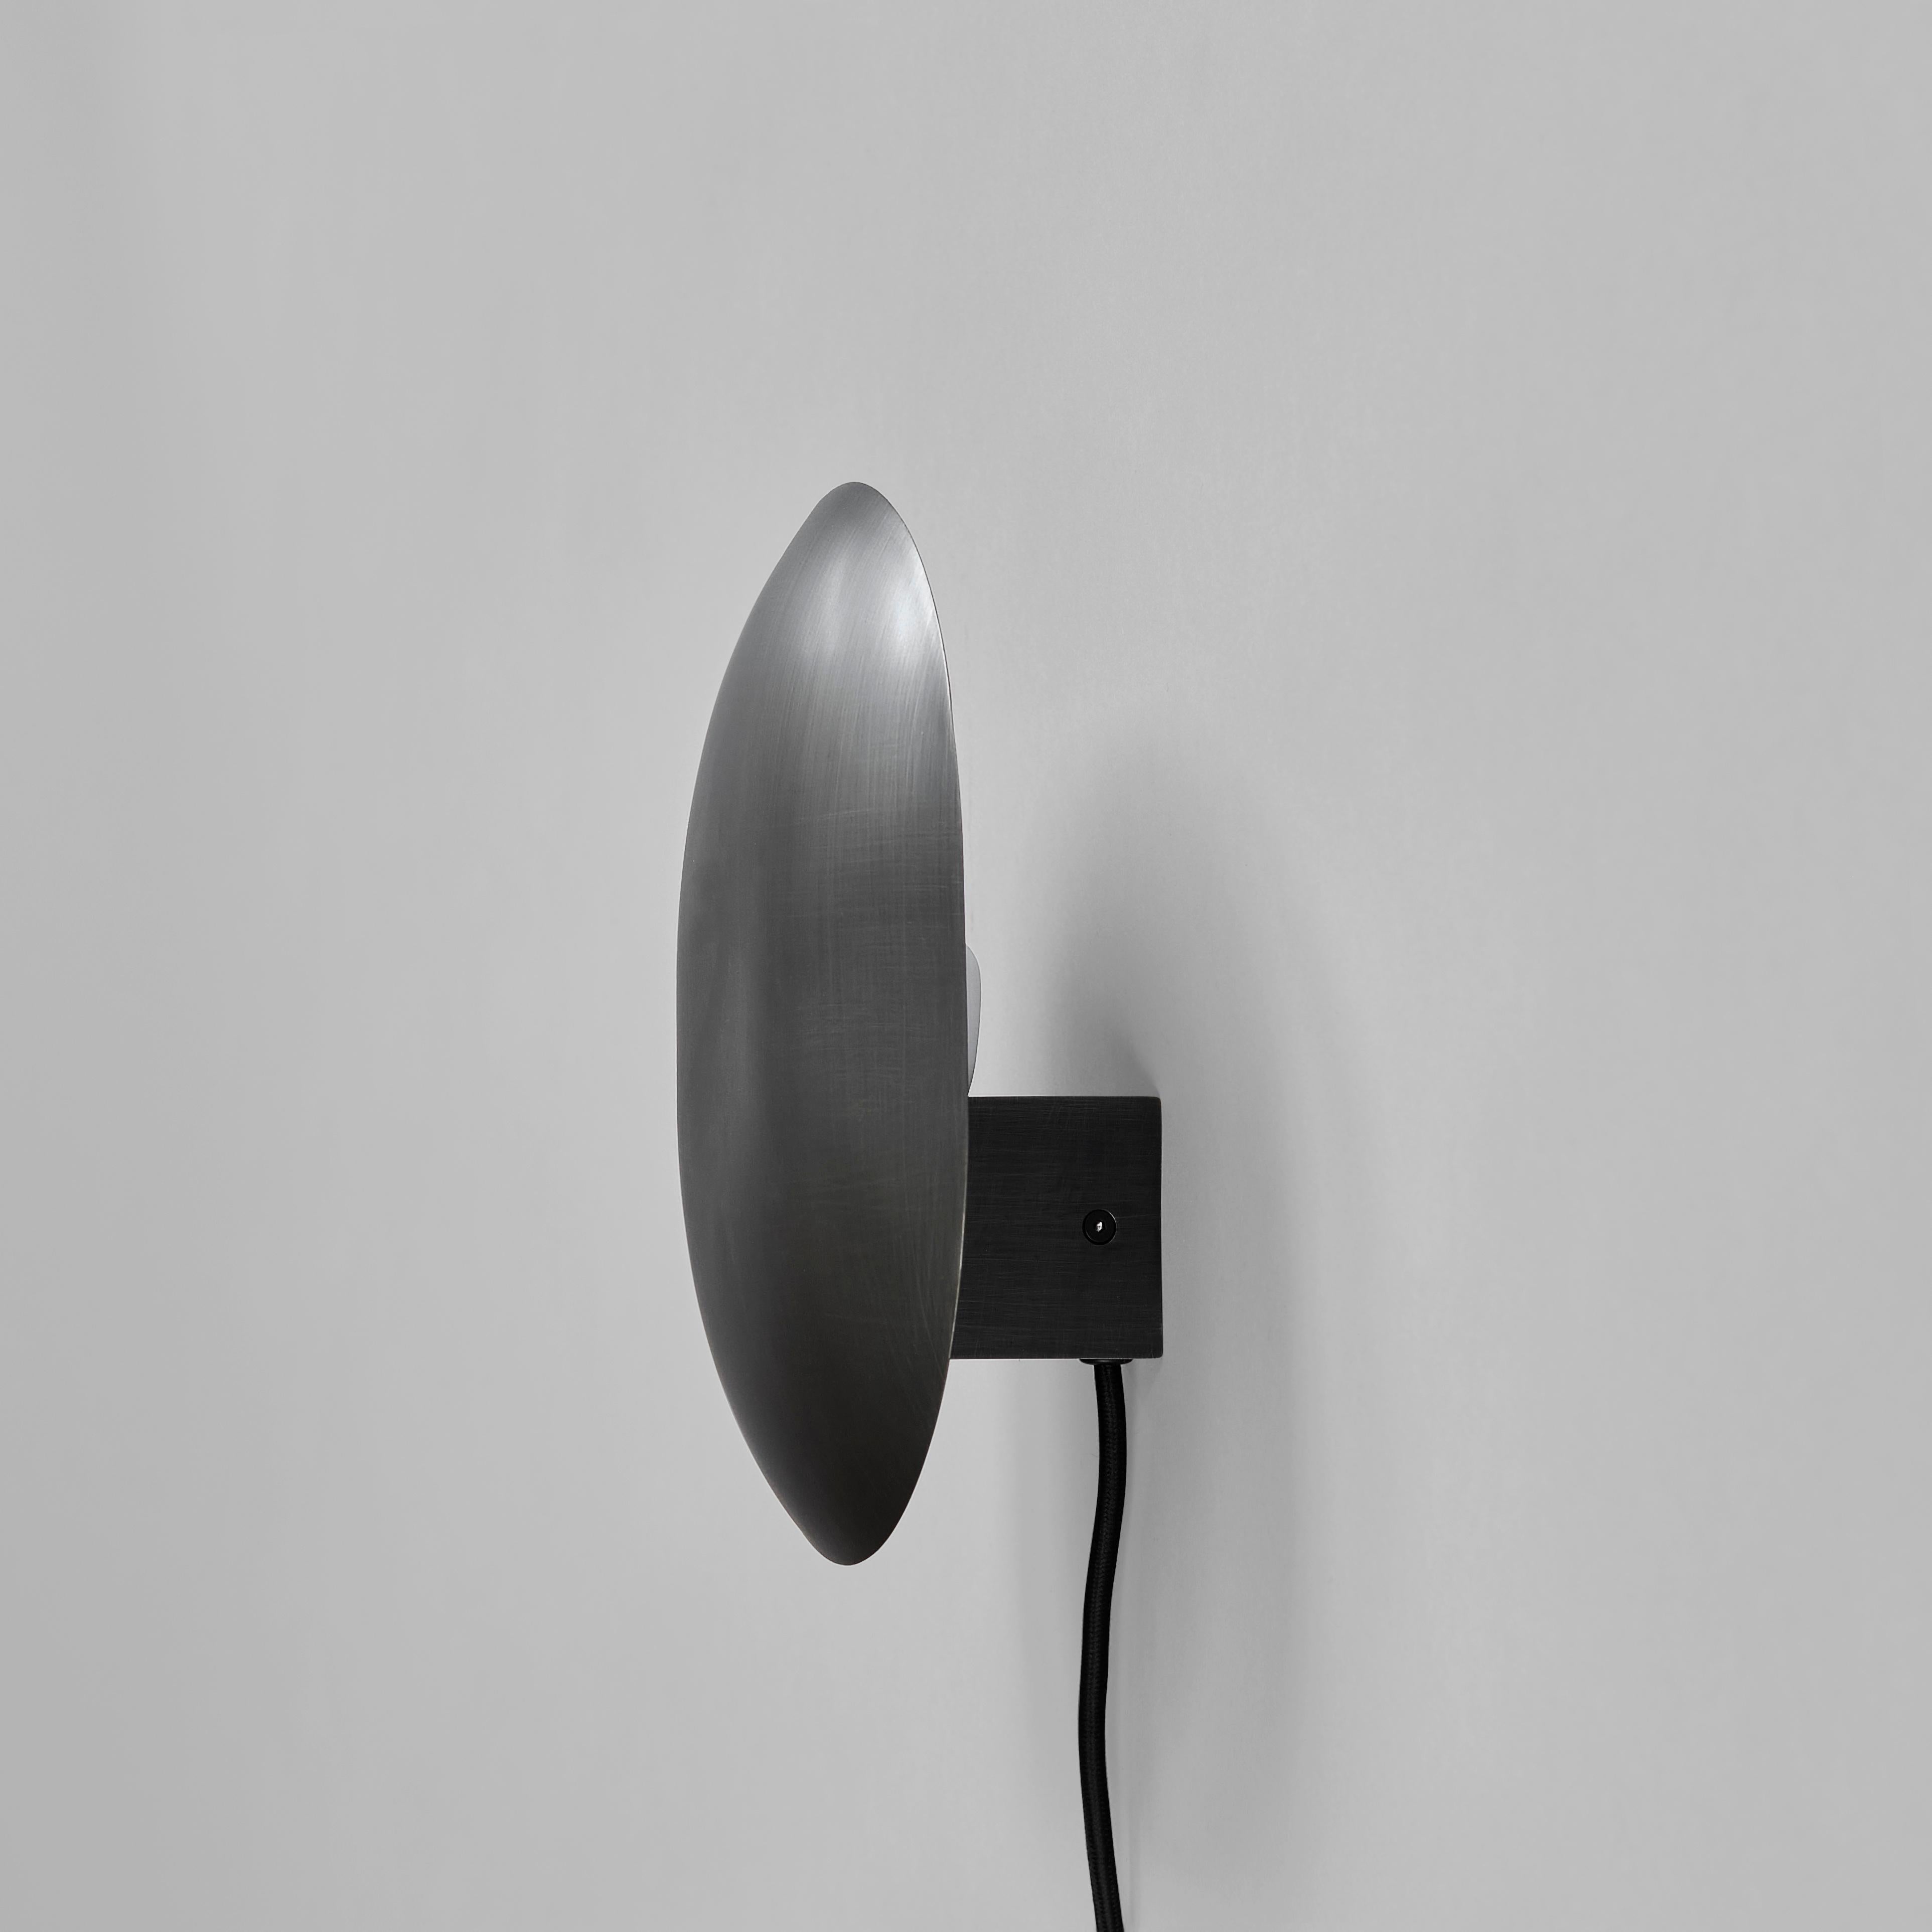 Bronze clam wall lamp by 101 Copenhagen
Designed by Kristian Sofus Hansen & Tommy Hyldahl
Dimensions: L 14 x W 22 x H 26 cm
Cable length: 170 cm
This product is not wired for USA
Materials: metal: plated metal / bronze
Cable: fabric covered cable /